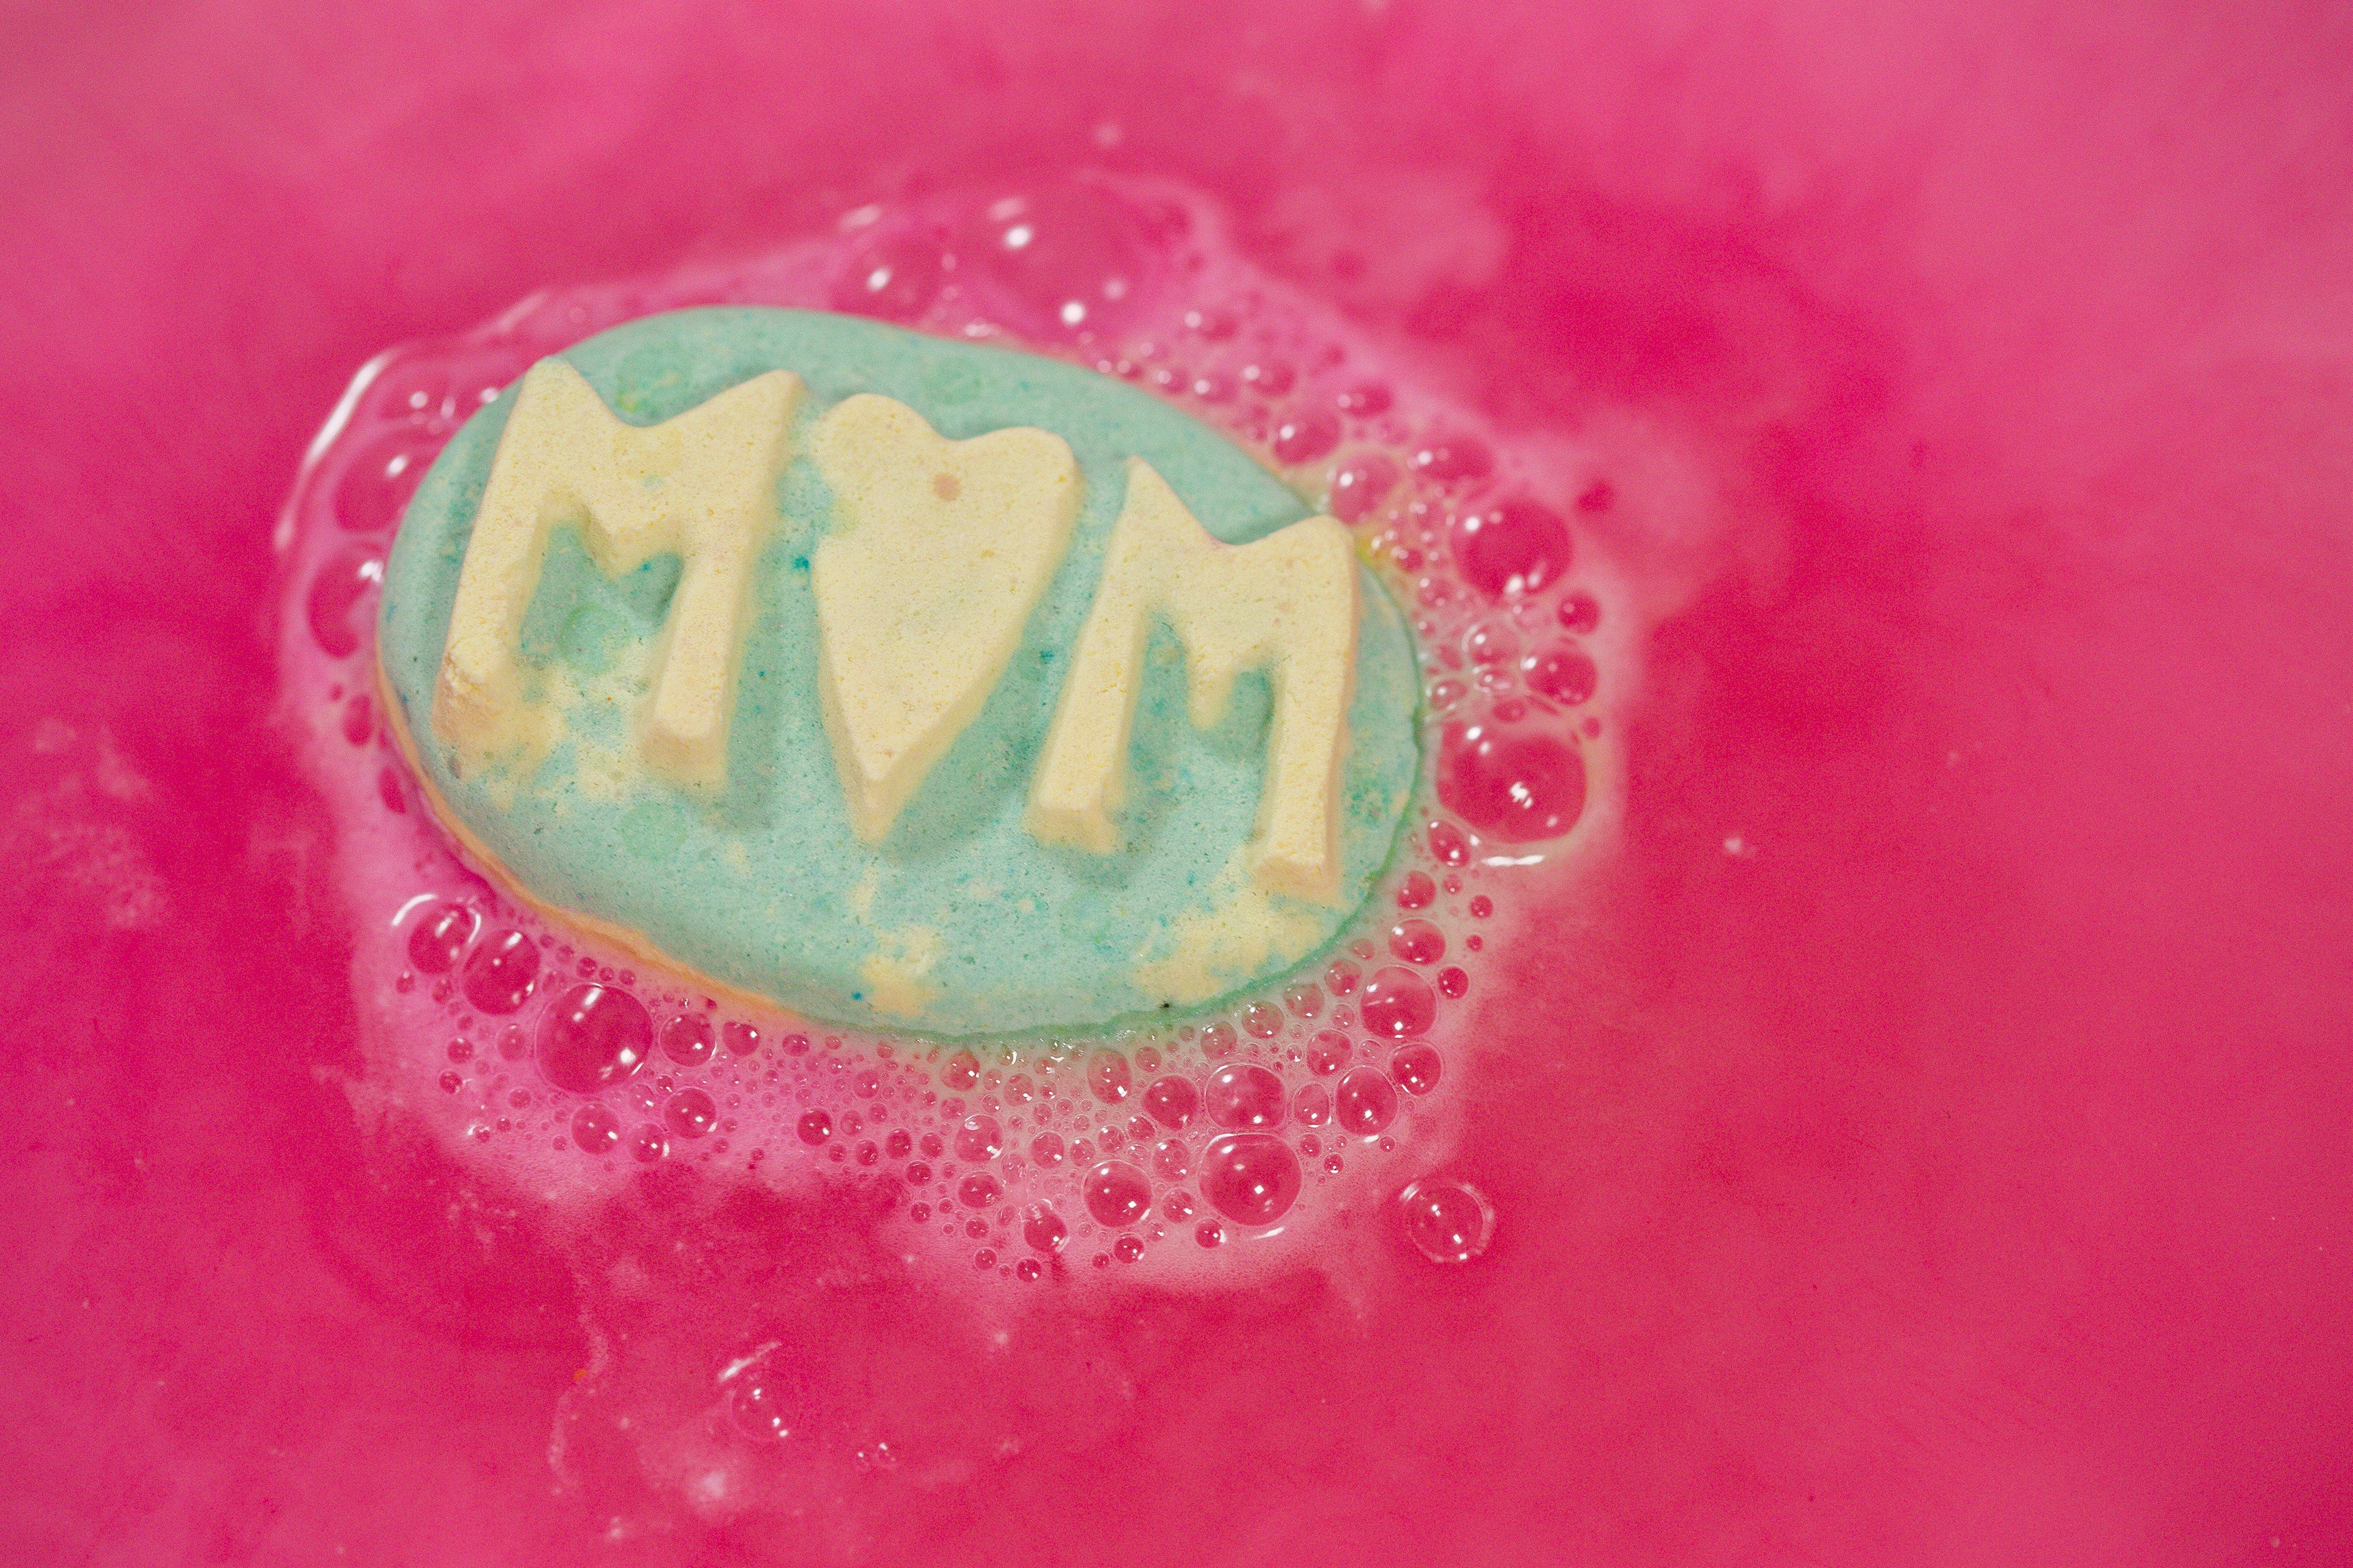 Thanks To Lush's New Mother's Day Collection, You Can Shower Your Mom With Cute Bath Bombs